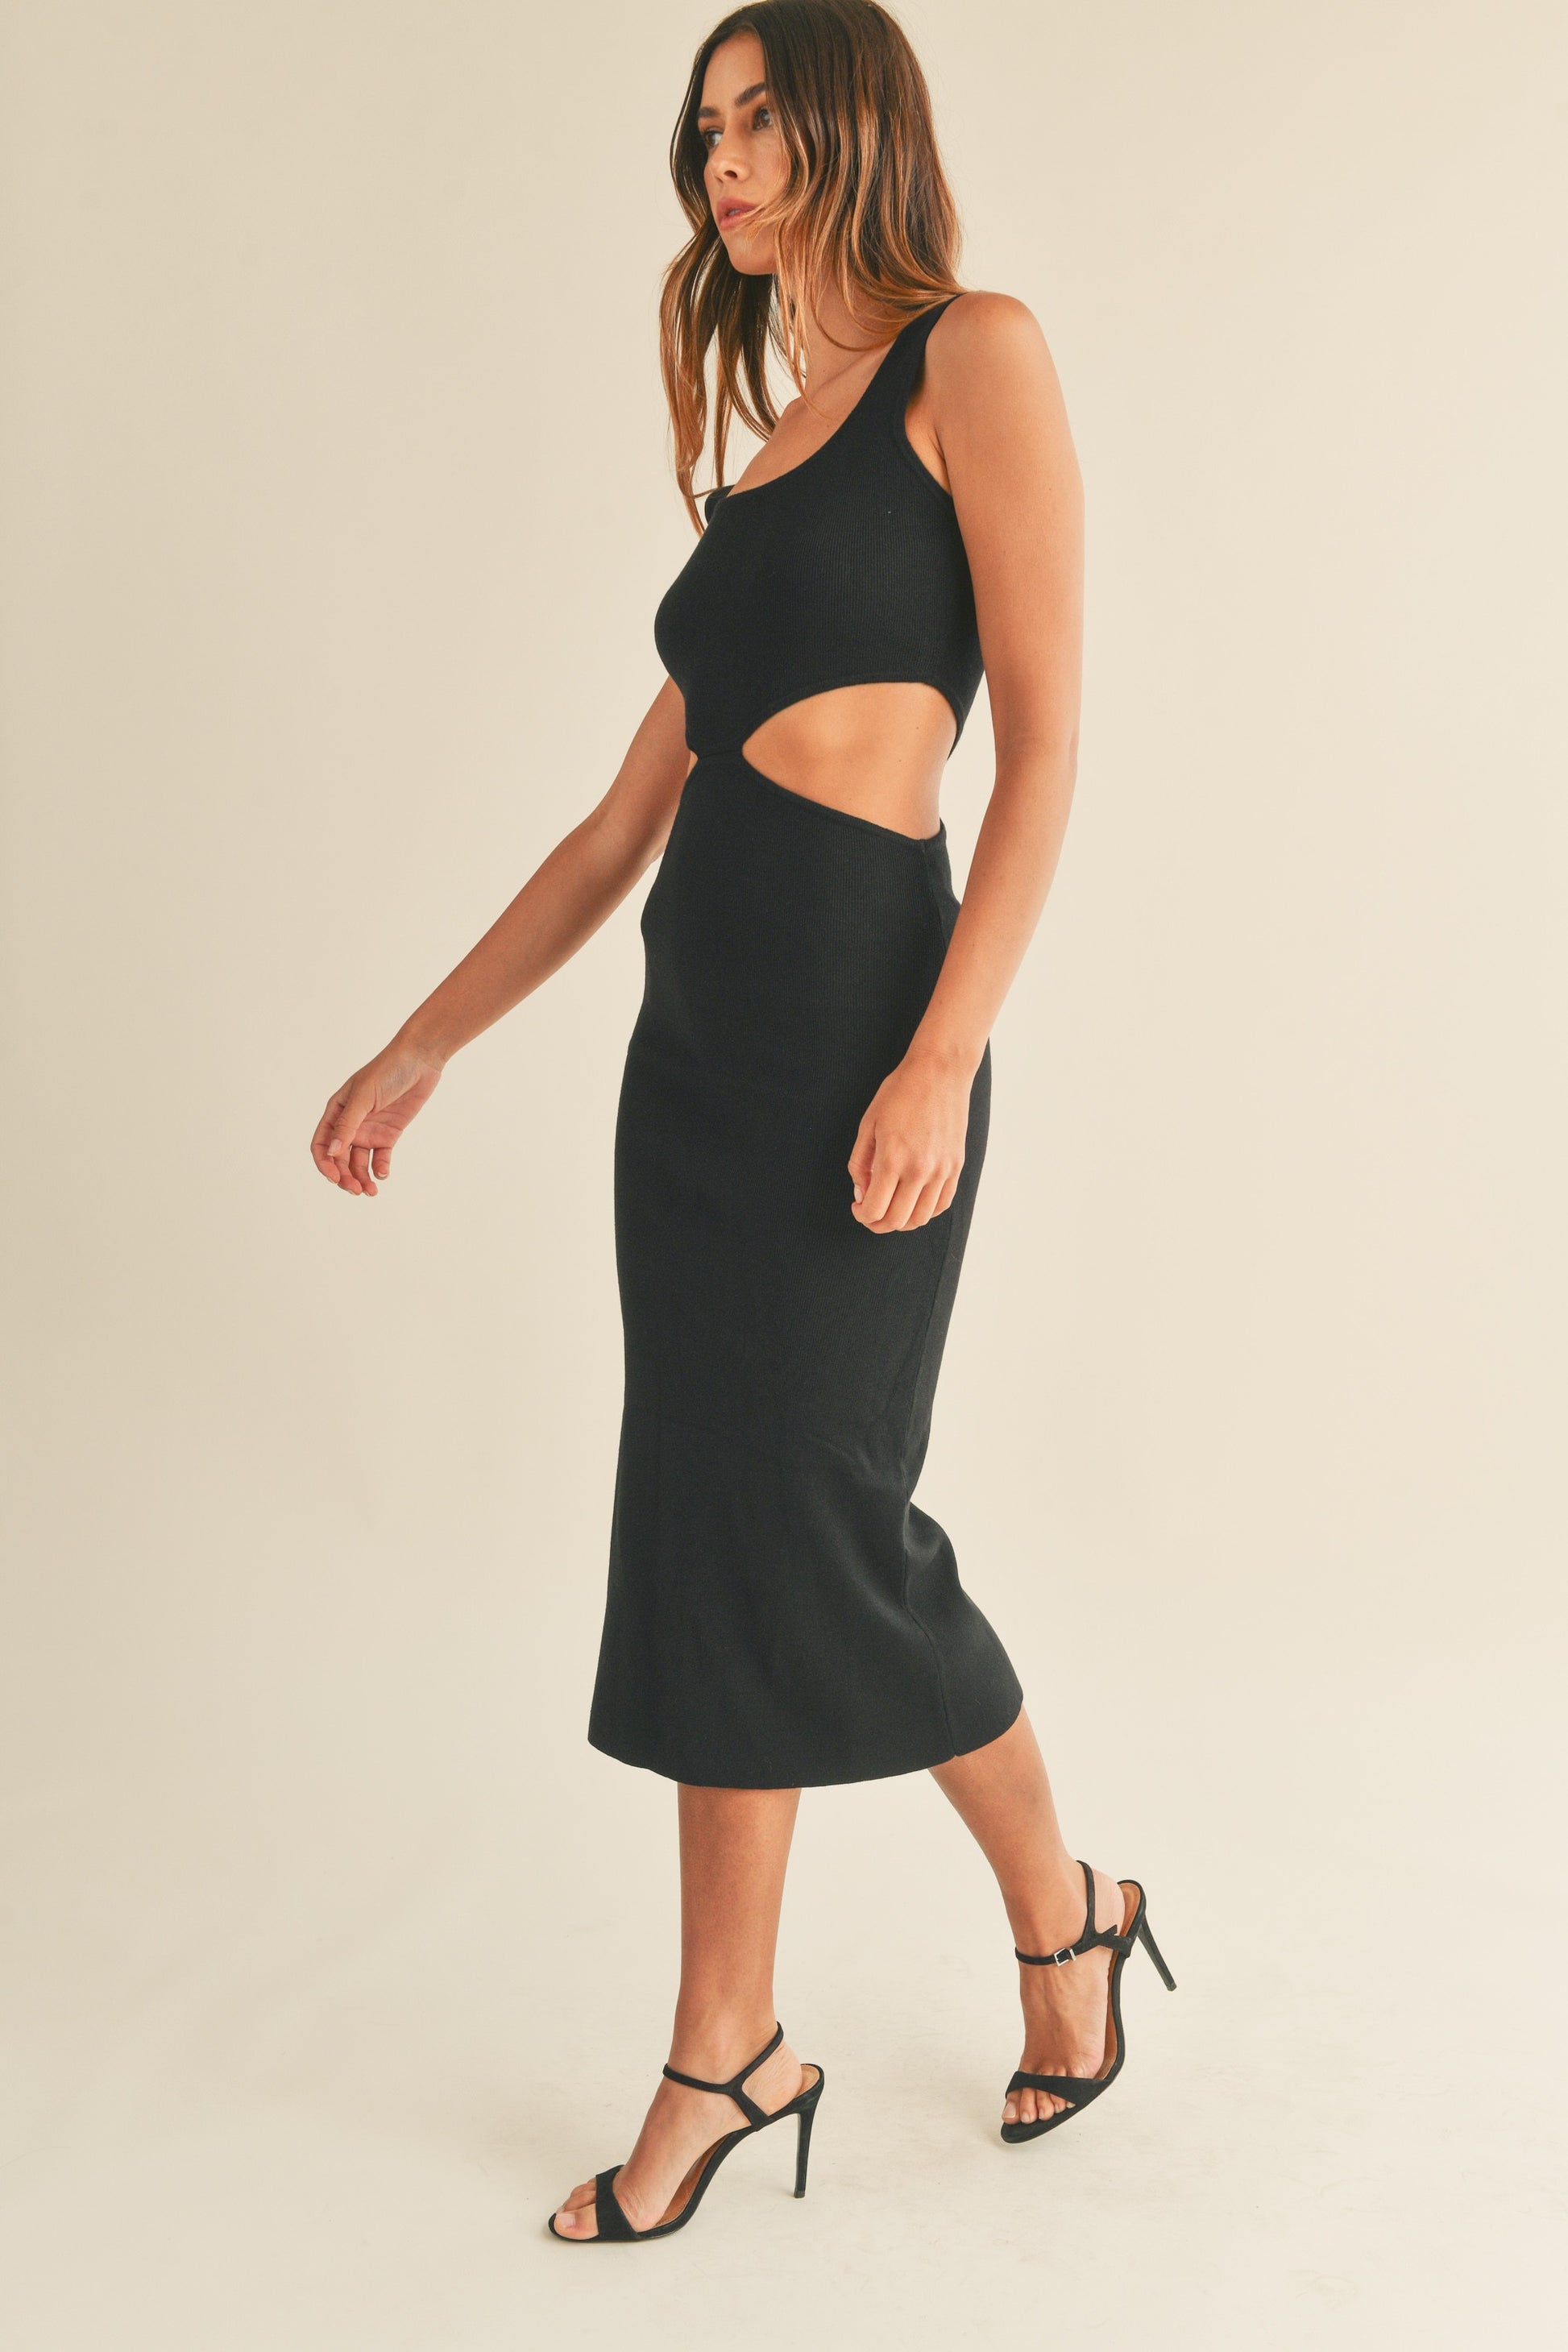 Knit sleeveless midi dress in black features side cut outs and a tank-style top. Side view.